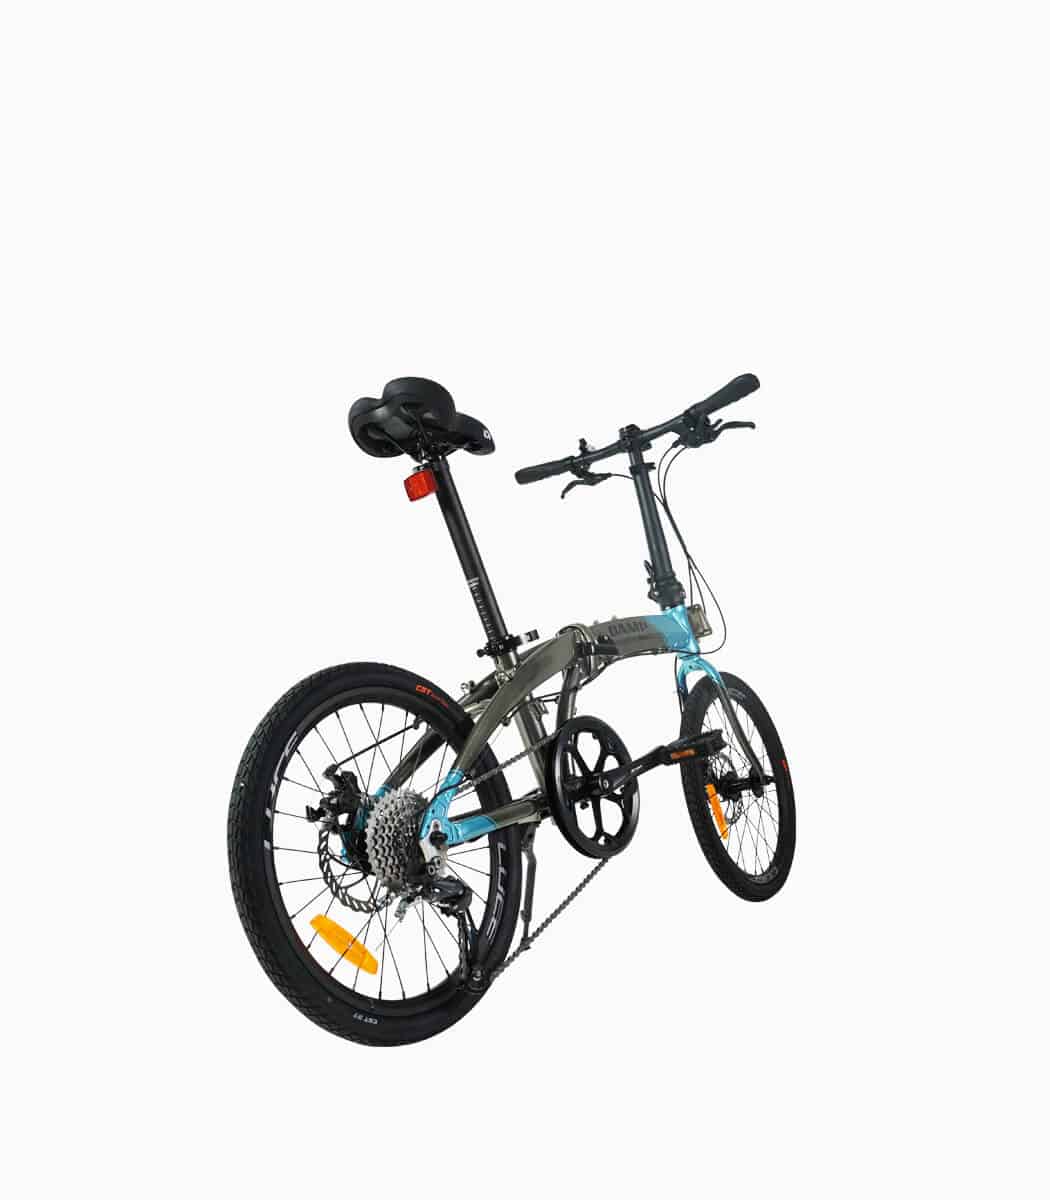 CAMP SPEEDO X (STONE-BLUE) foldable bicycle rear angled right